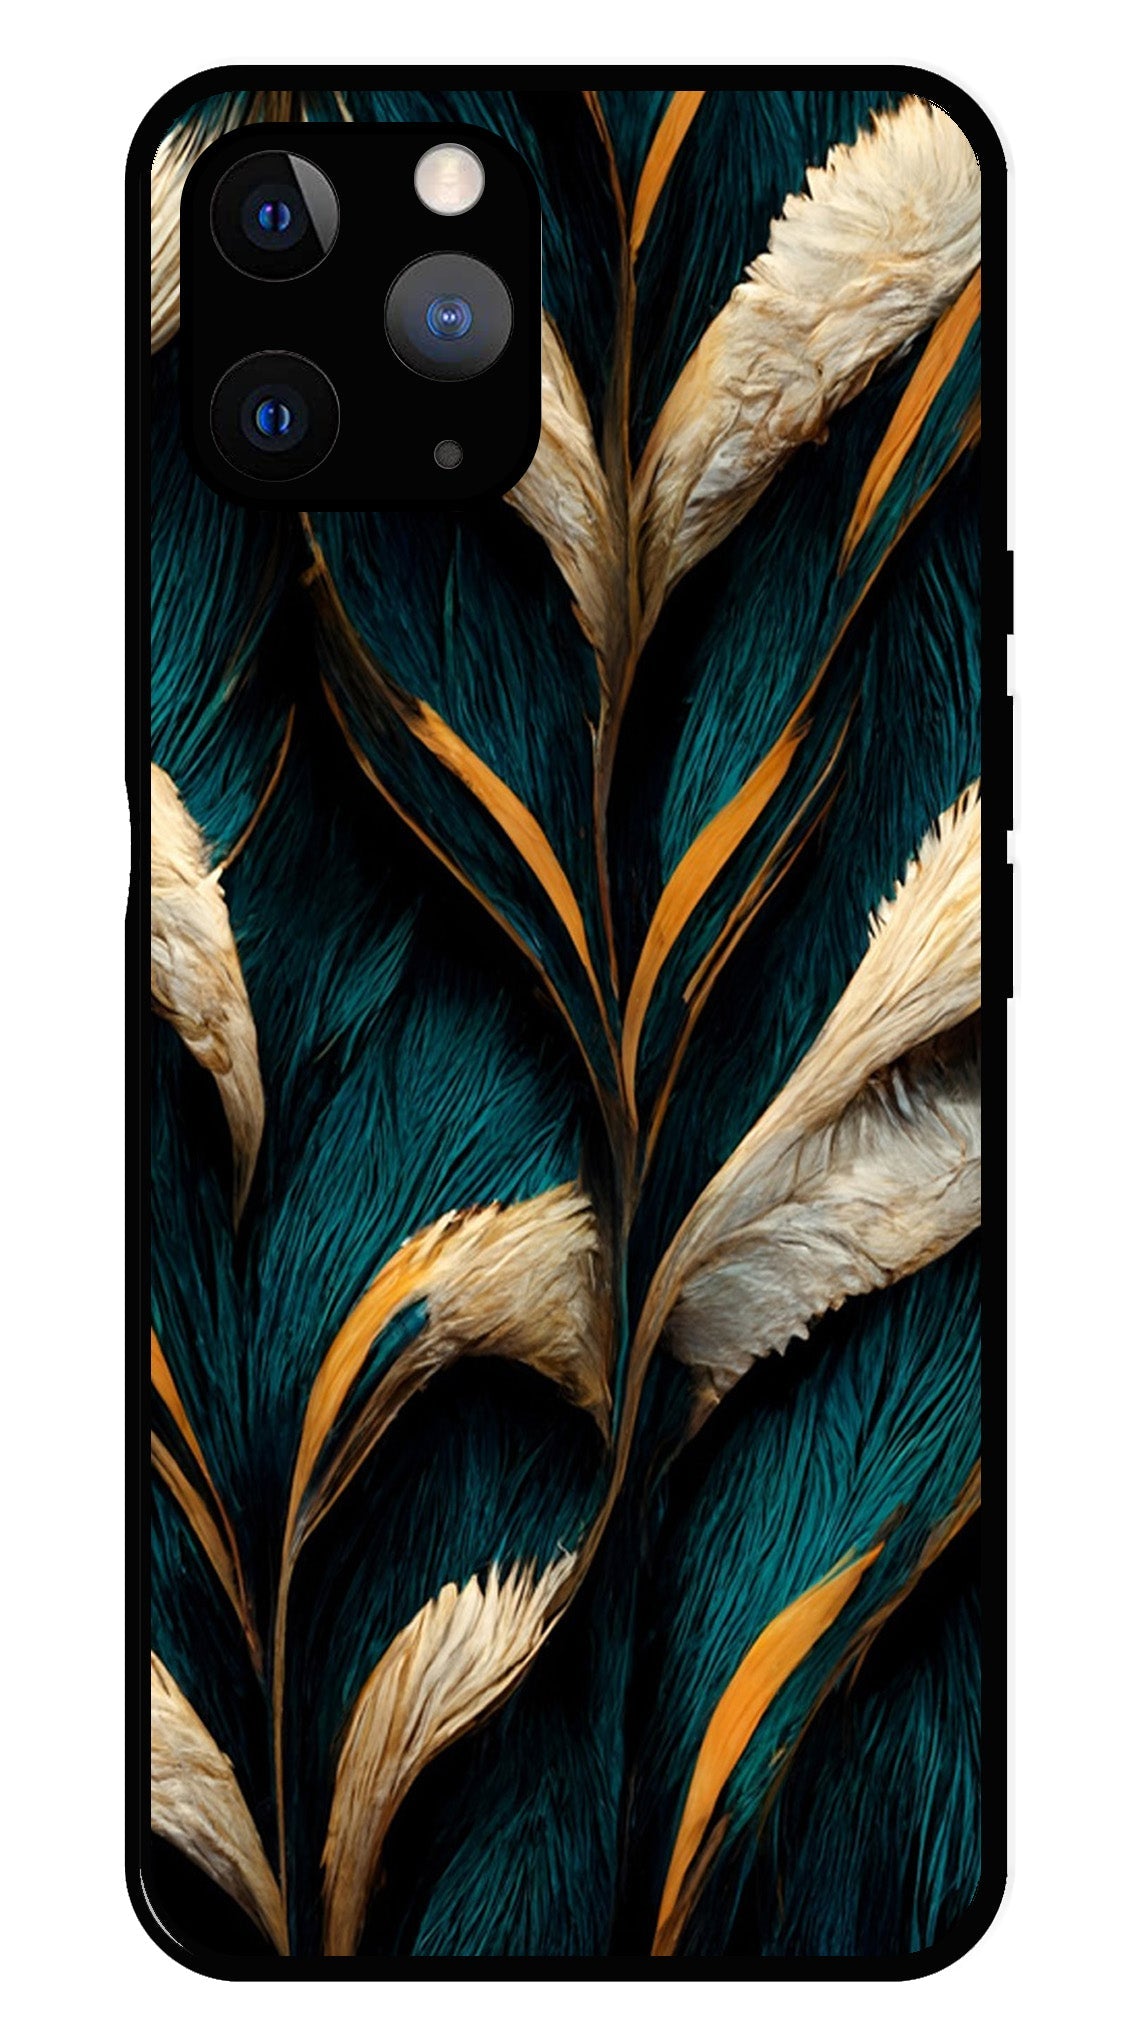 Feathers Metal Mobile Case for iPhone 11 Pro